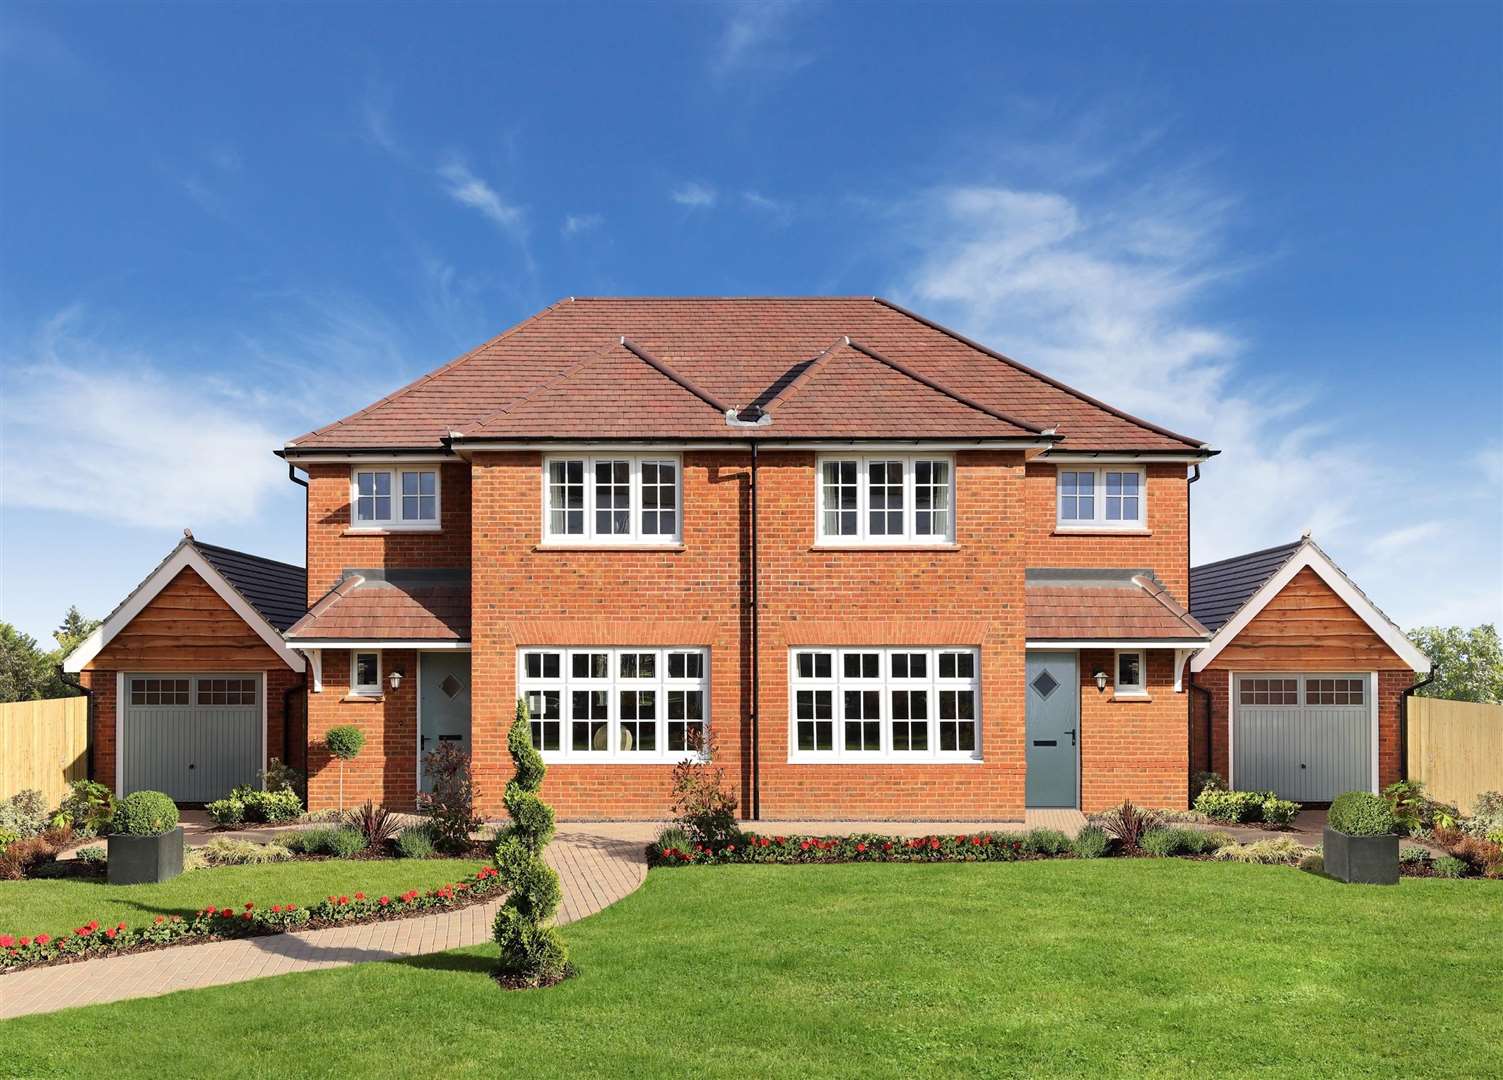 One of the house types that will be available in the latest phase of Redrow’s scheme in Ebbsfleet Garden City (1561640)